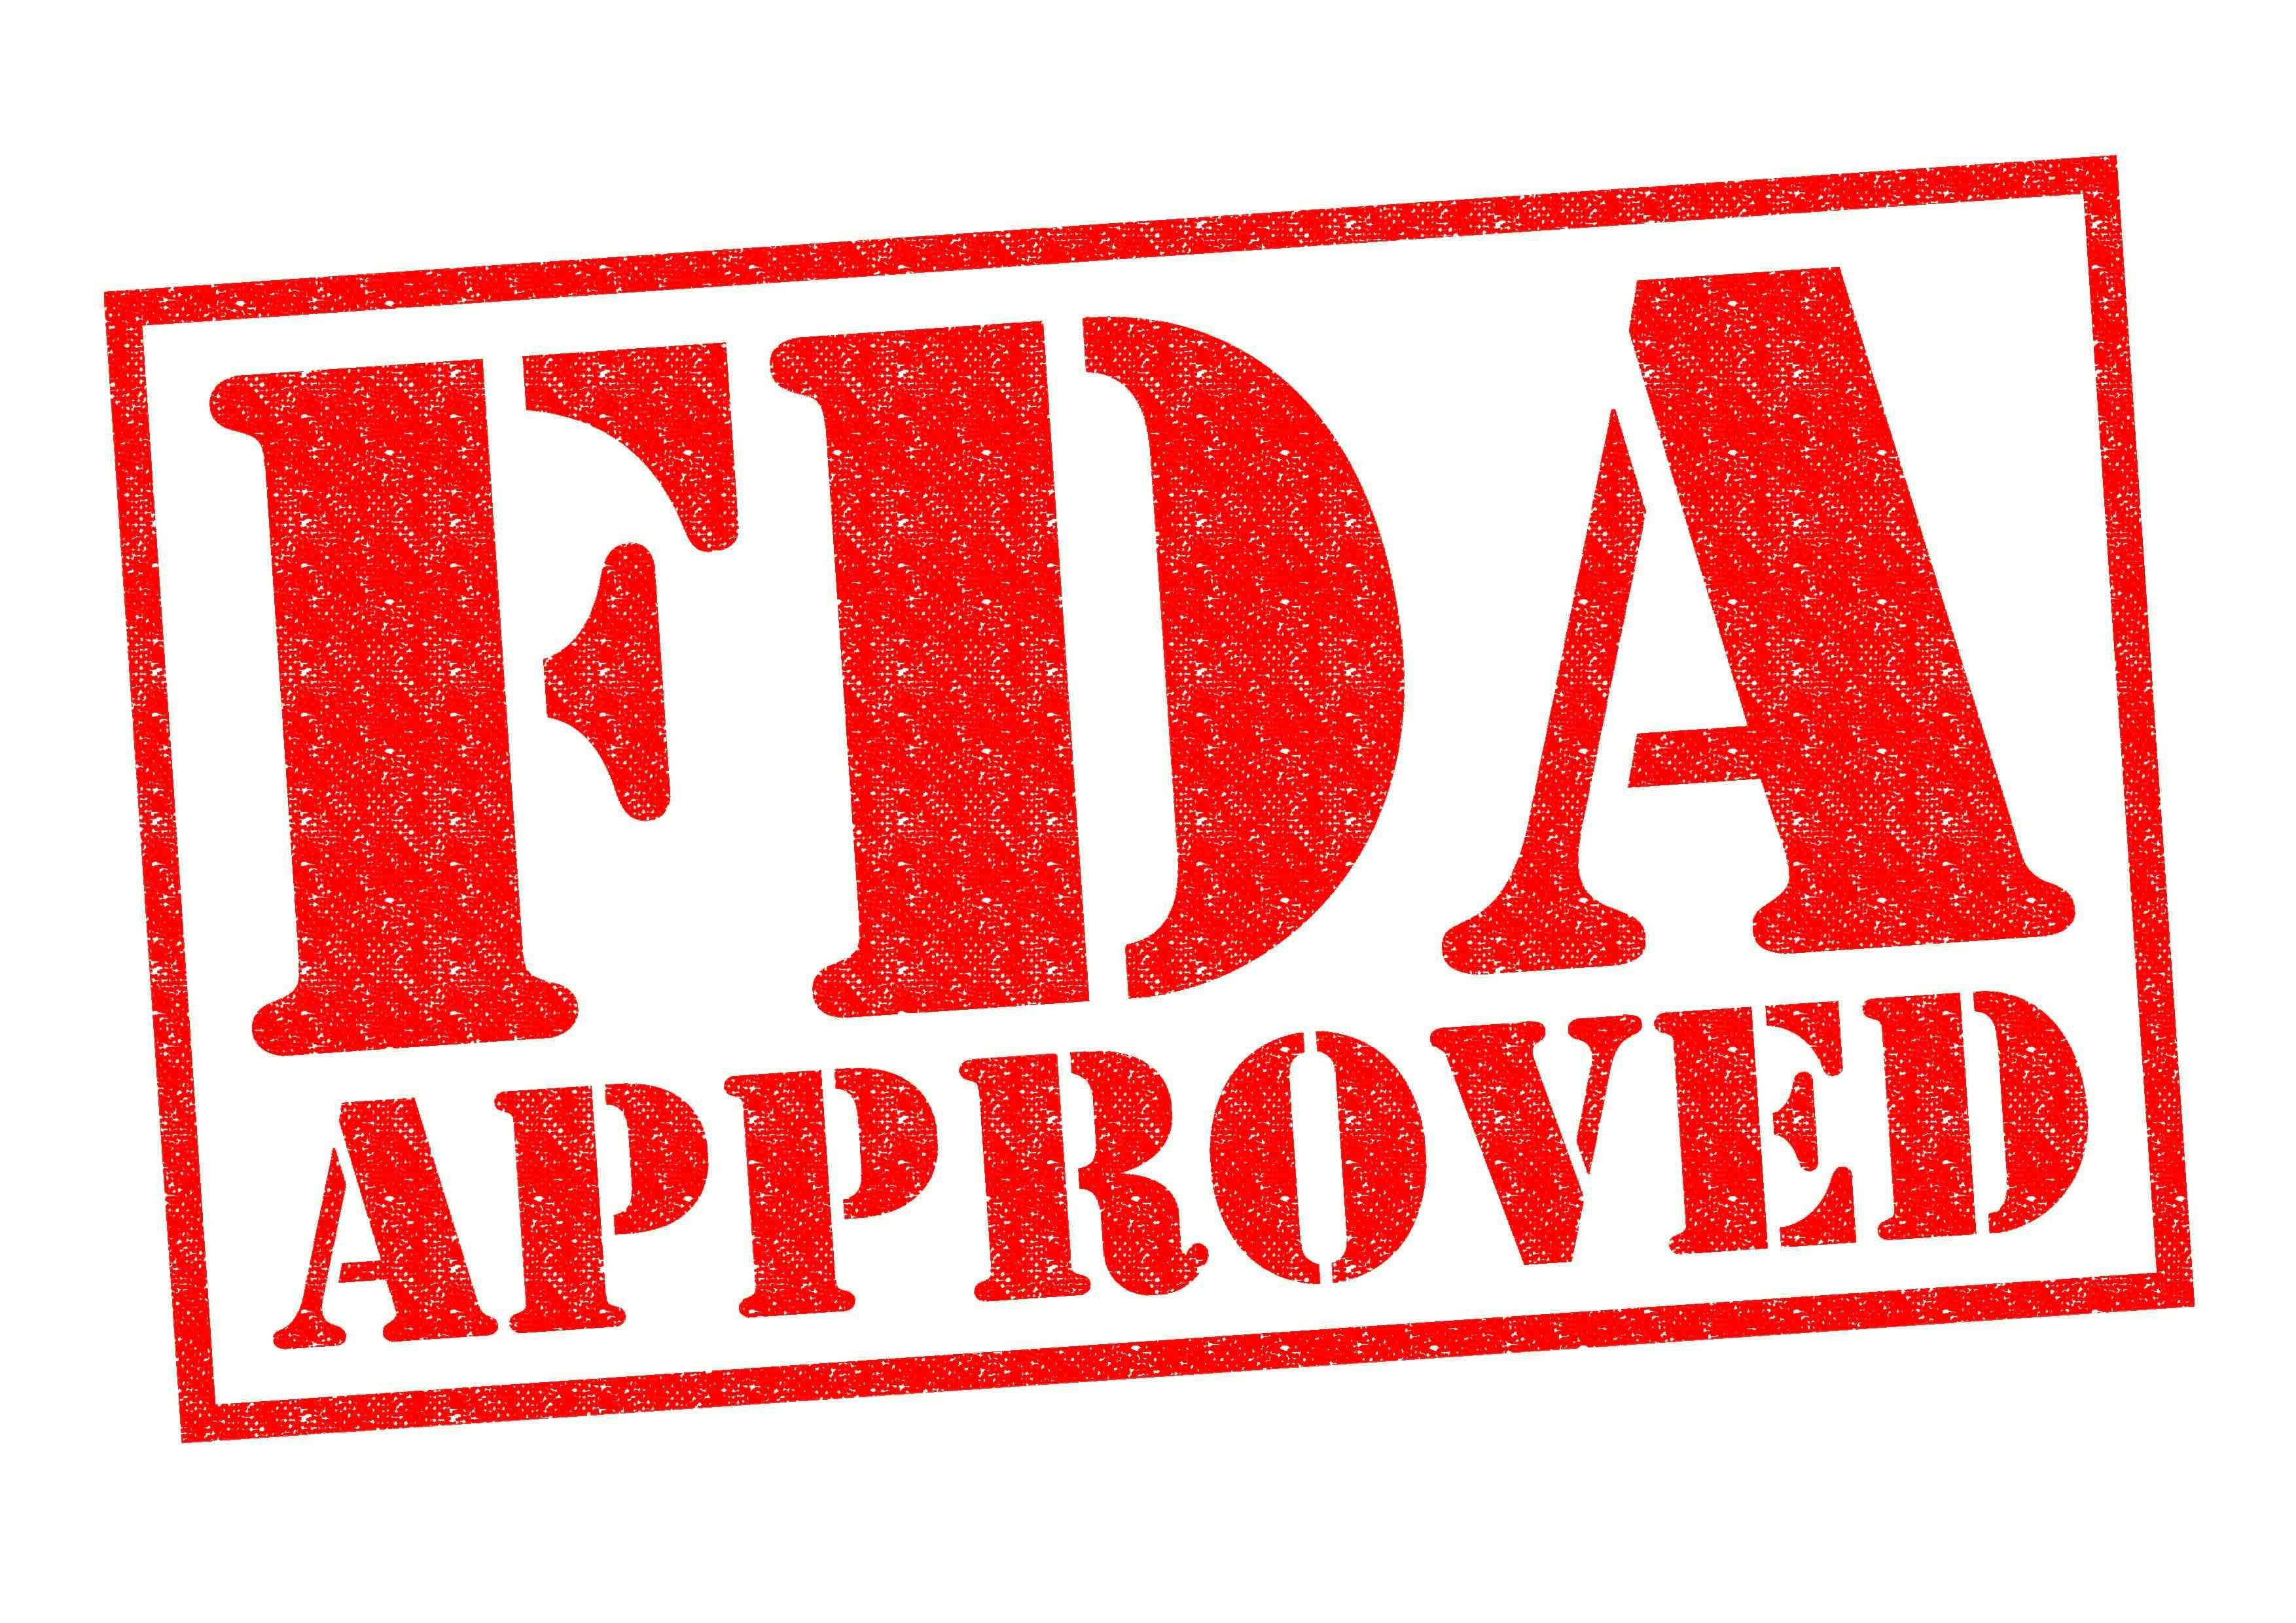 Red FDA Approved stamp on a white backgroun